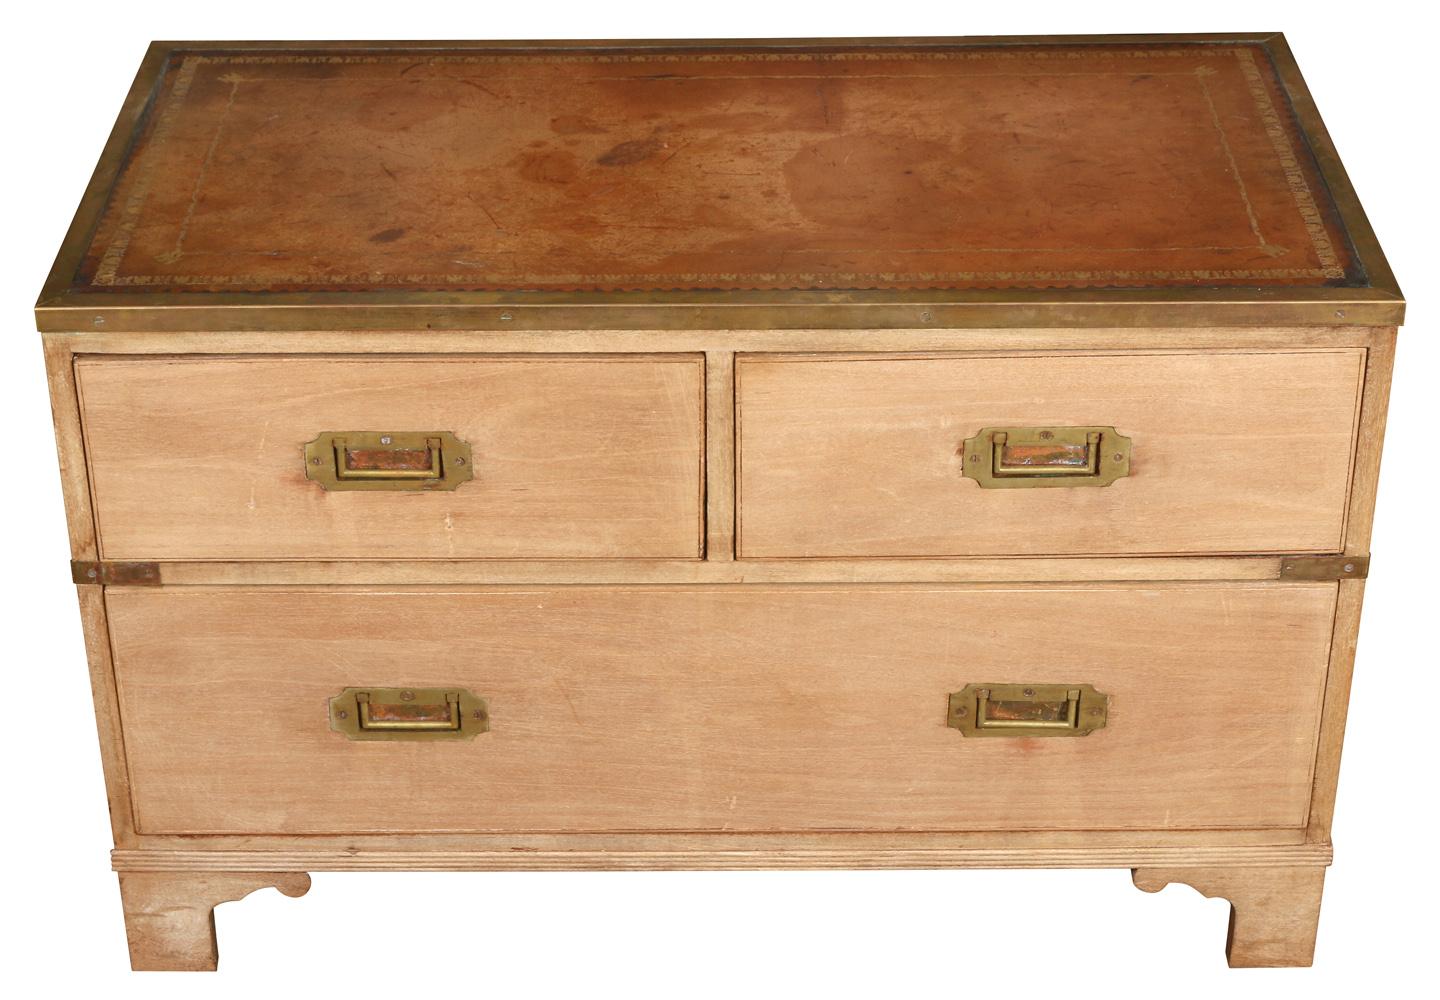 A unique example of campaign furniture, this low chest could be used in many ways--as a coffee table, a side table or even at the foot of a bed. It has a bleached mahogany finish, with a tooled brown leather top and brass hardware, and is raised on